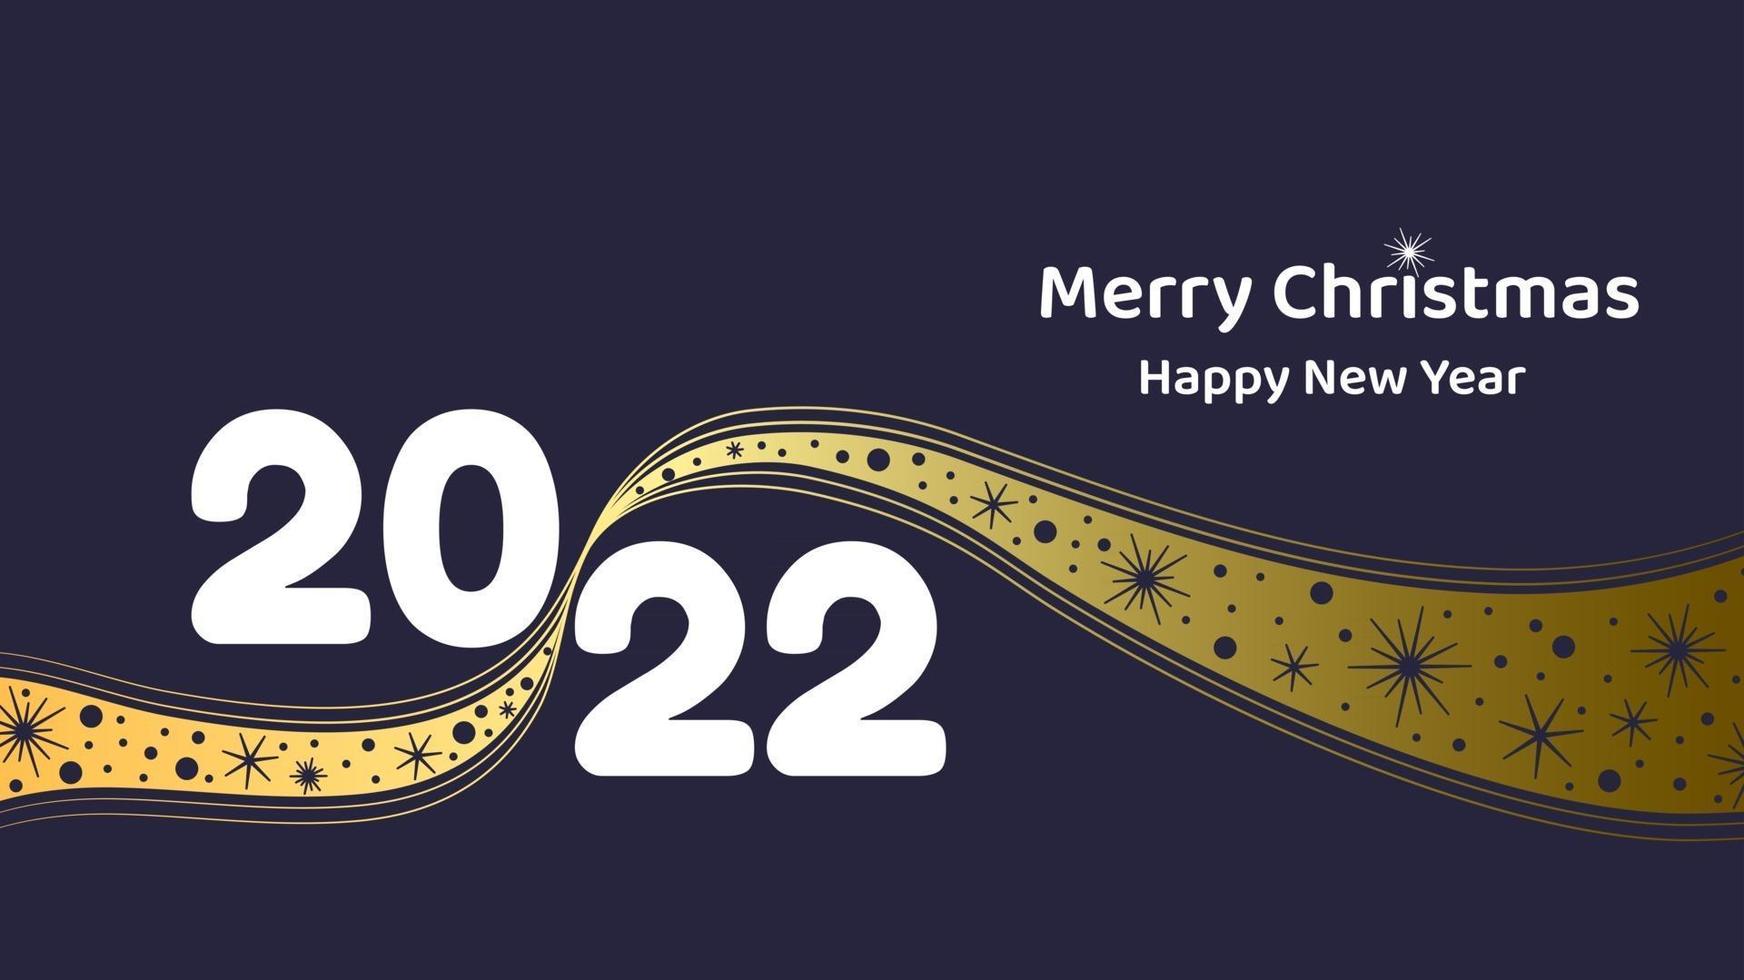 Merry Christmas and New Year 2022. Greeting card or banner with golden